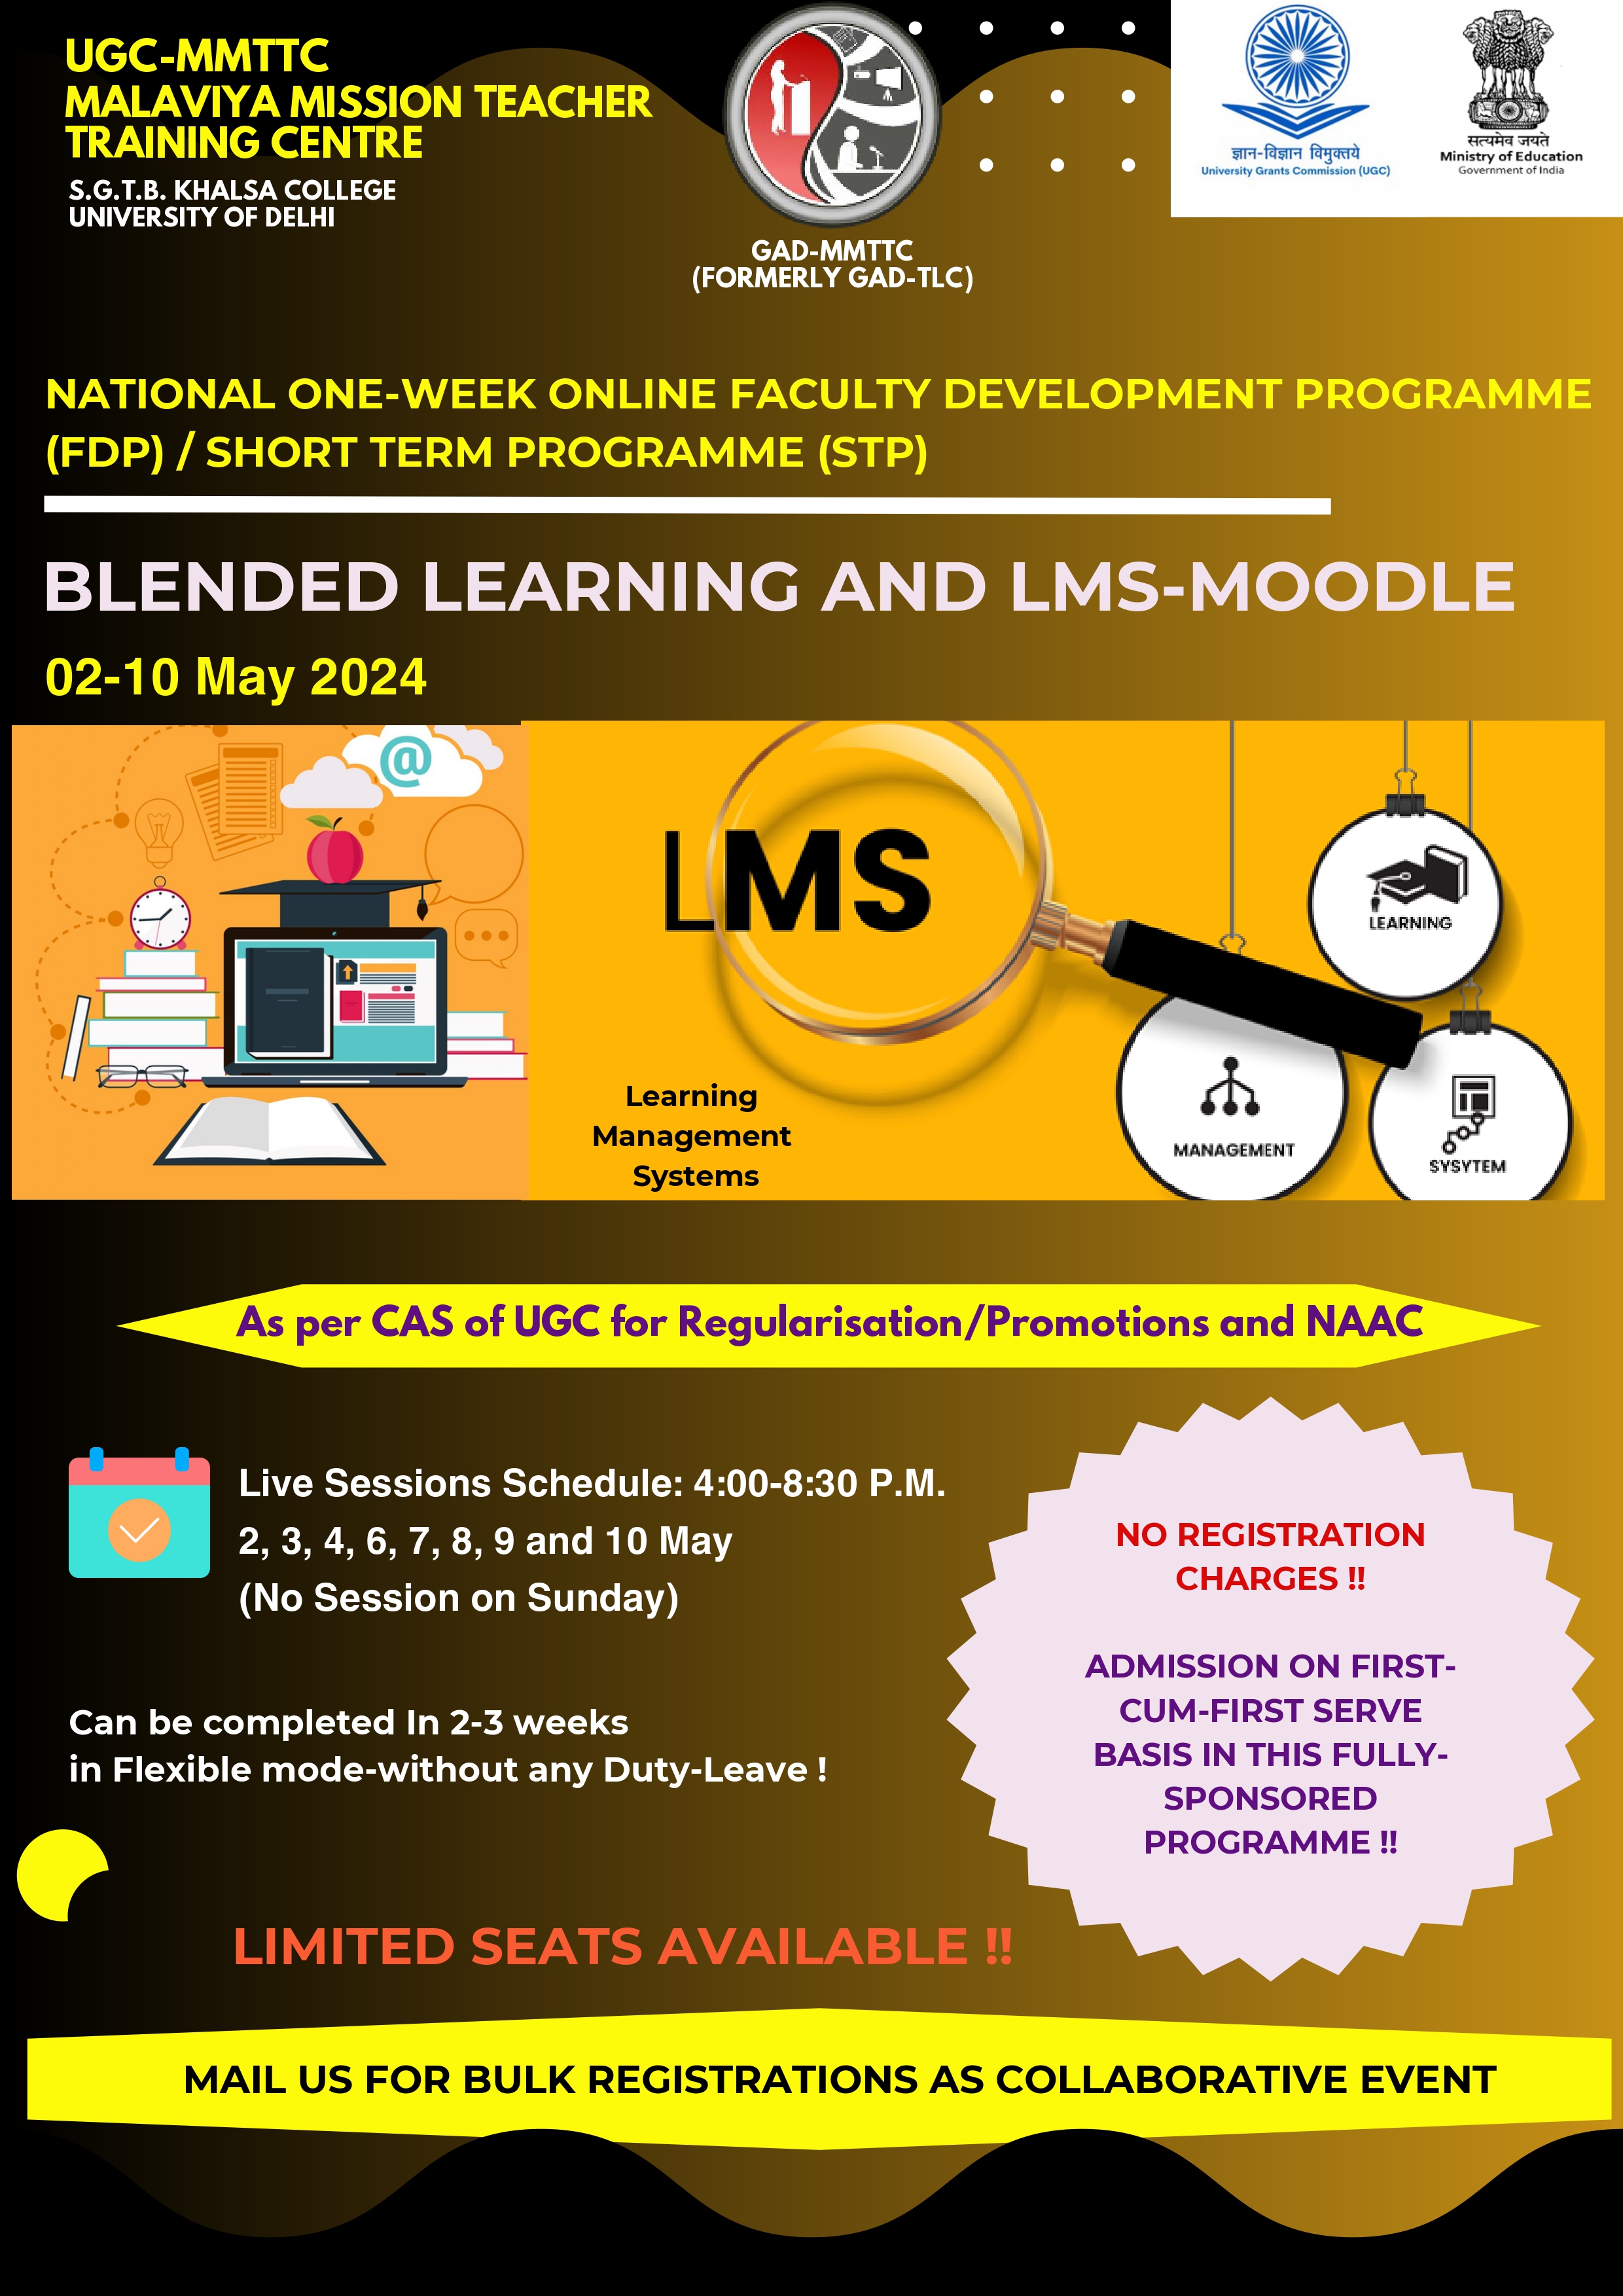 Course Image FDP/STP-002: BLENDED LEARNING AND LMS-MOODLE